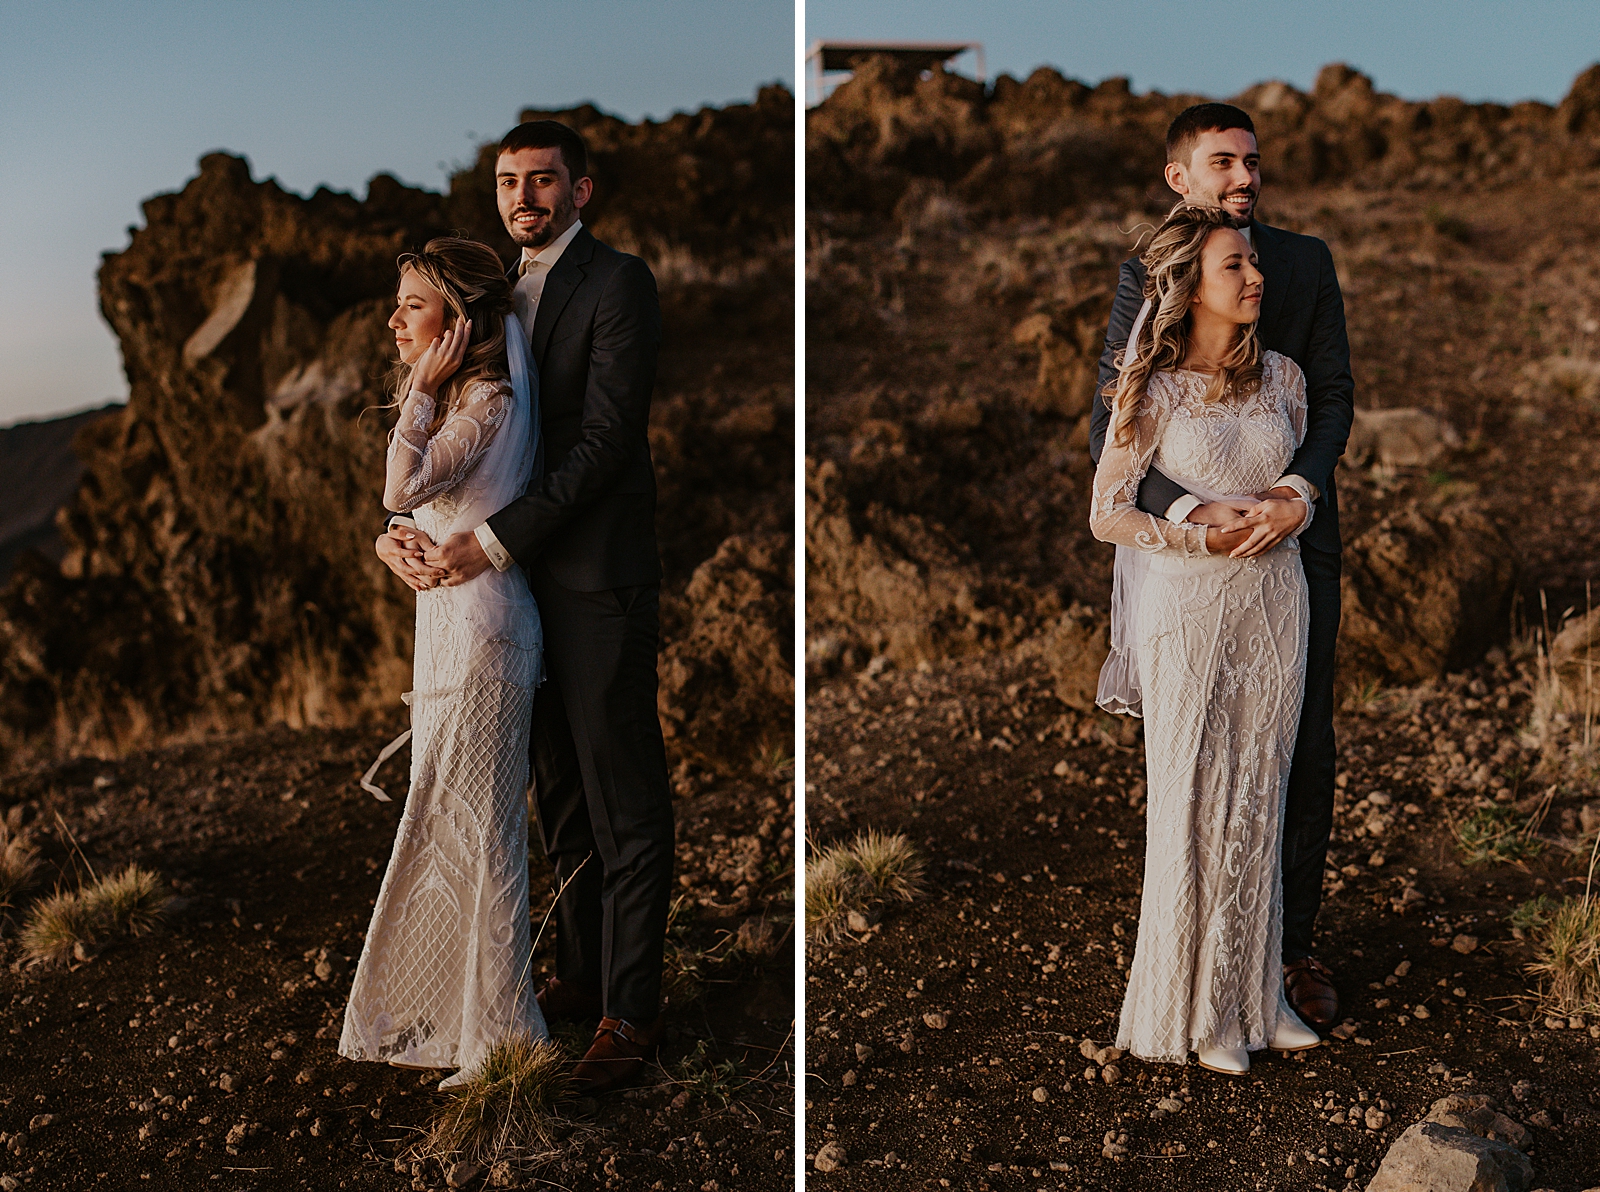 Portraits of Groom holding Bride from behind on cliffside